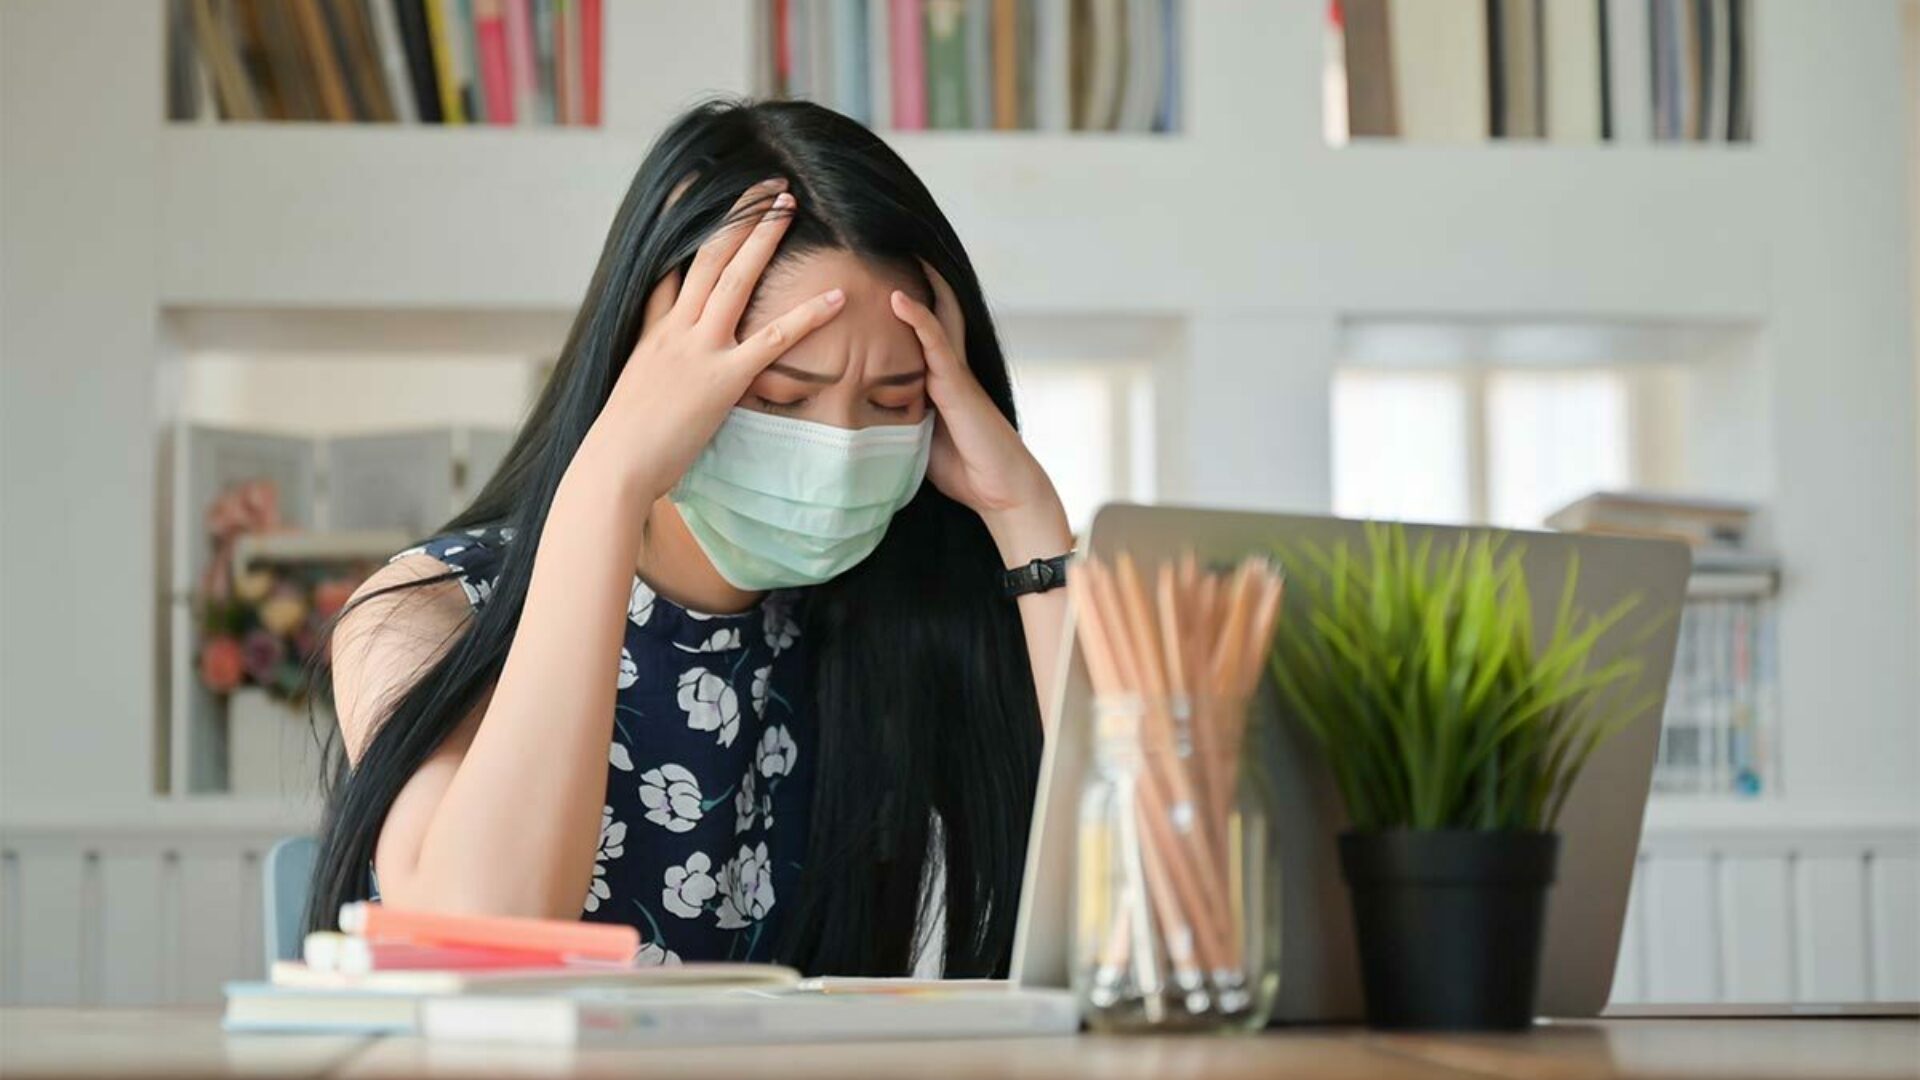 Stressed woman wearing a mask works on her computer